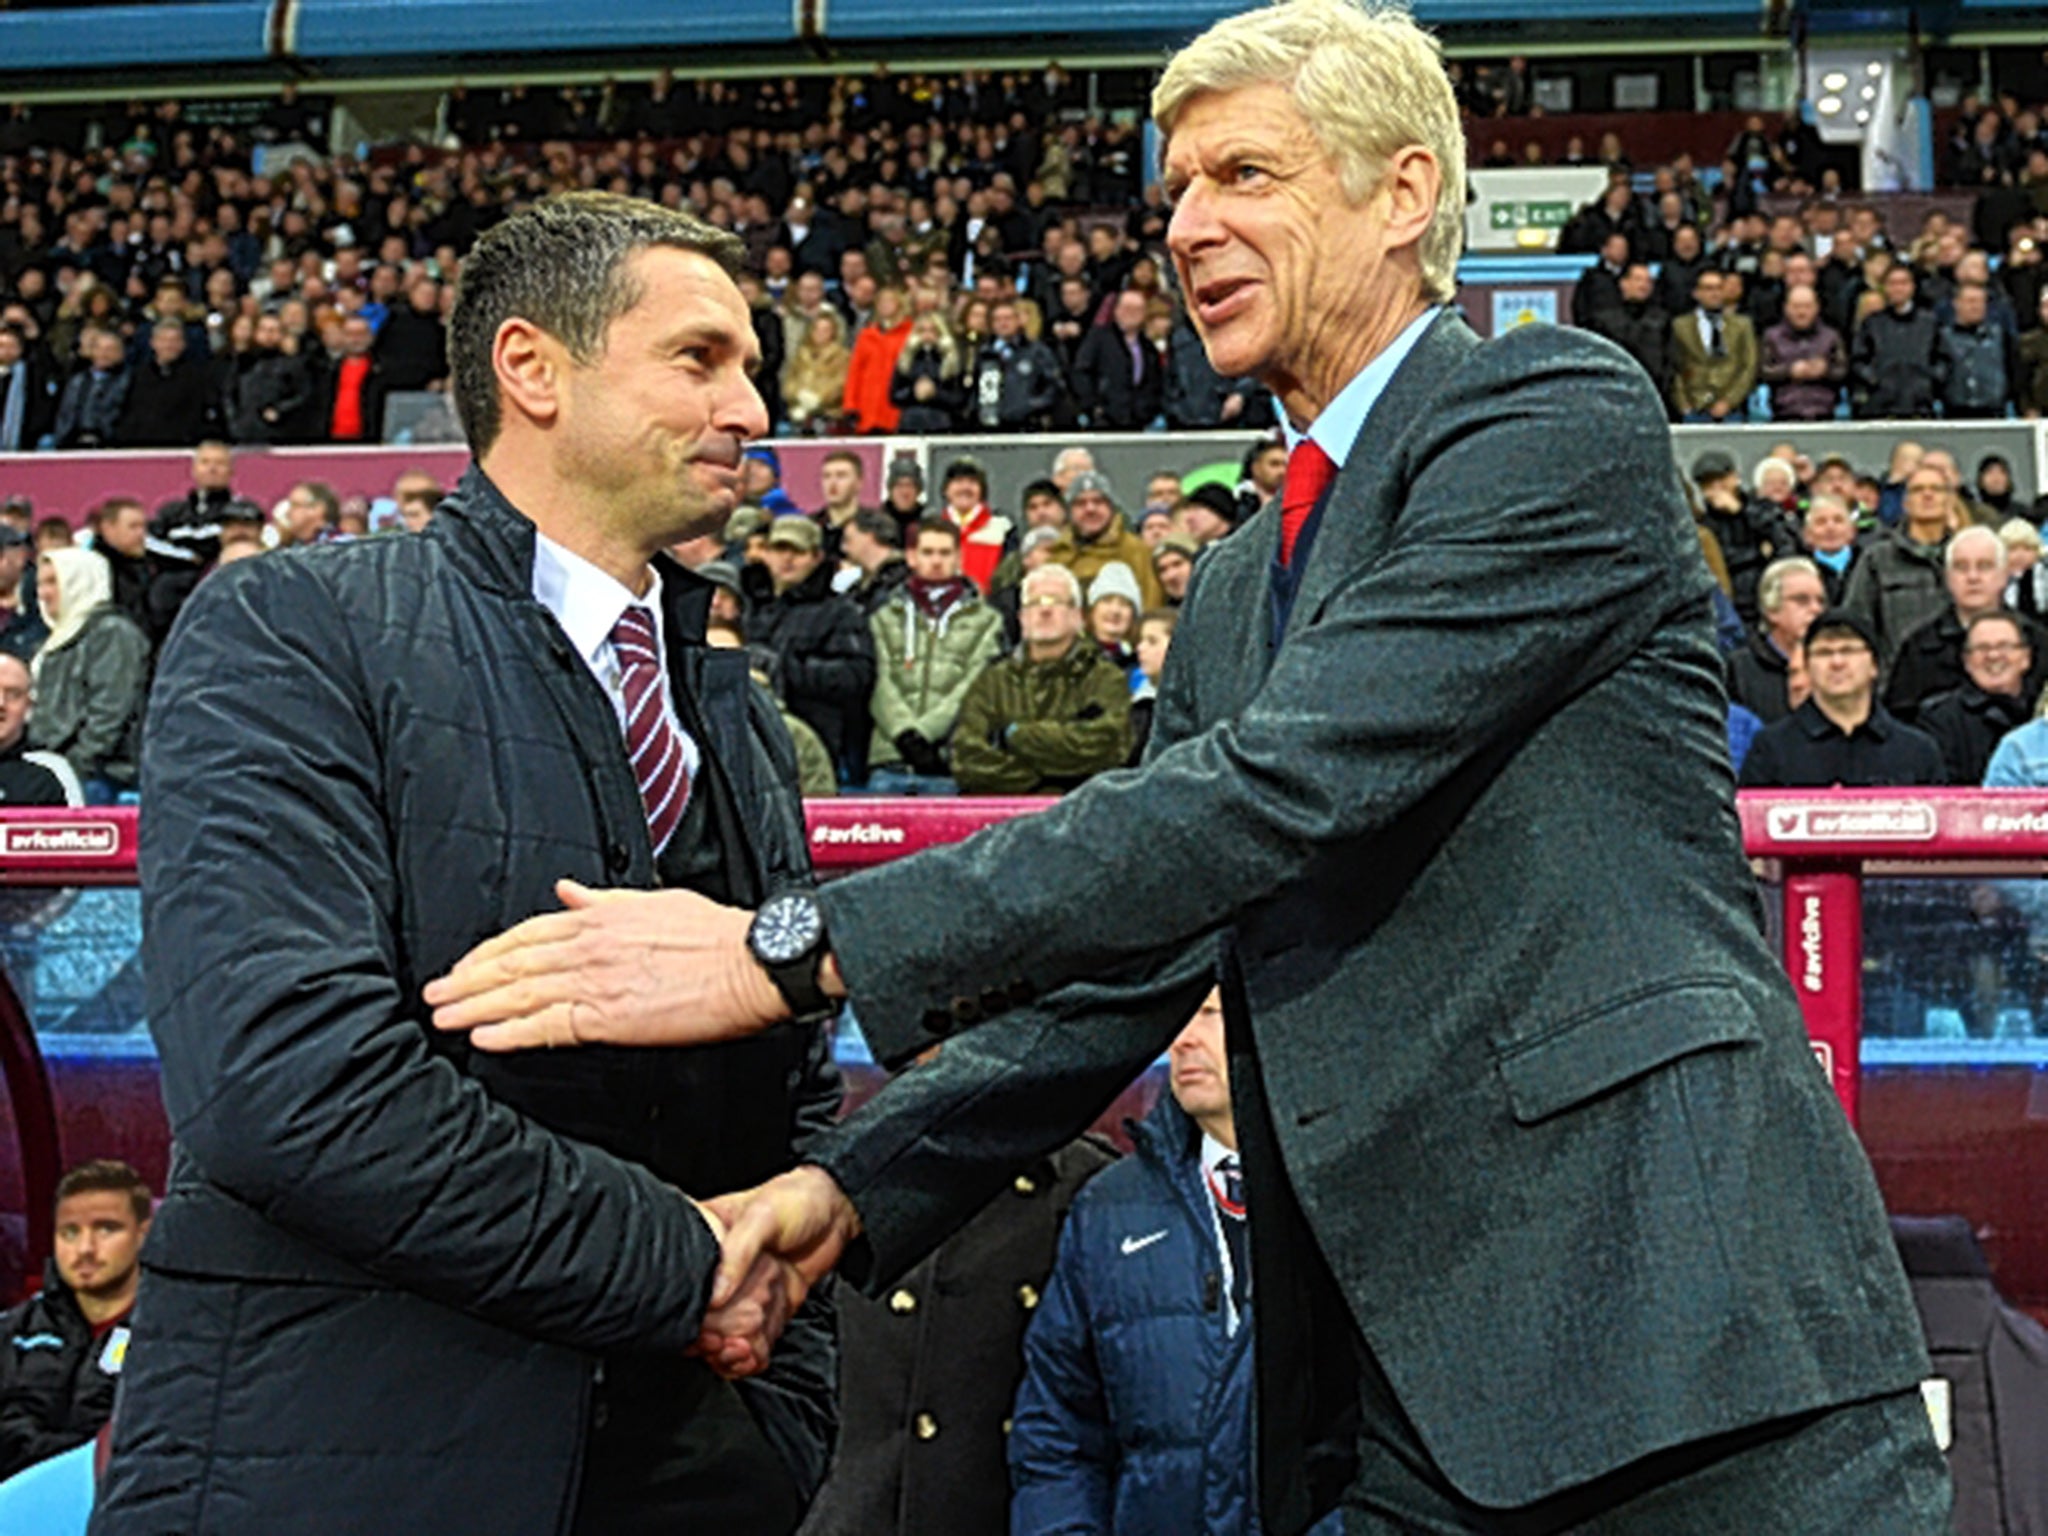 Arsène Wenger (right) shakes hands with his Aston Villa counterpart Rémi Garde before the game